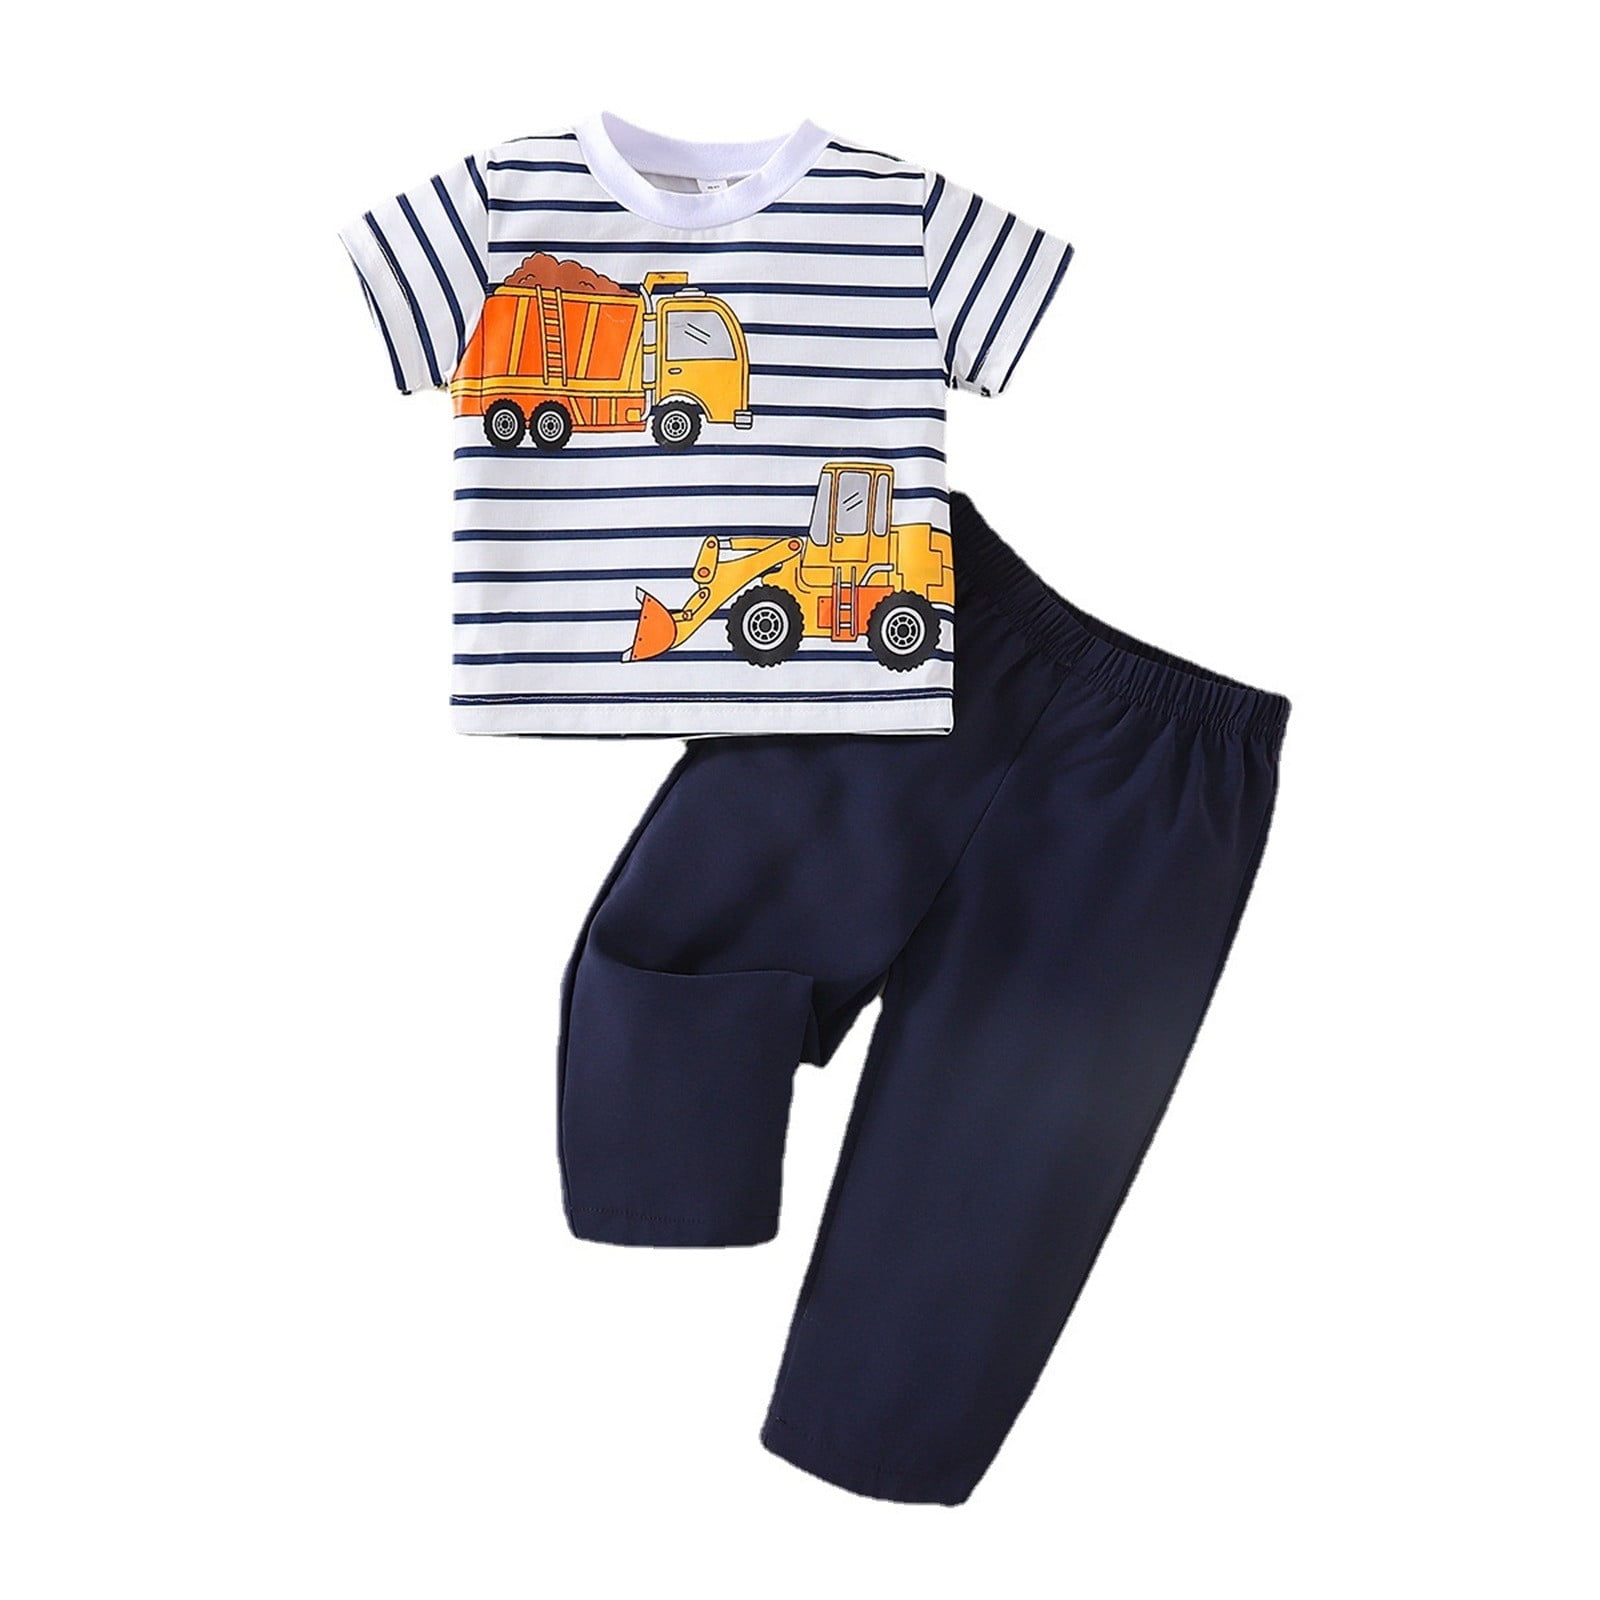 Girls Sweat Suit Size 10 Baby Boys Cute Cartoon Striped Short Sleeve T  Shirt Blouse Tops Solid Pants Trousers Outfit Set 2PCS Clothes 3 Month Baby 